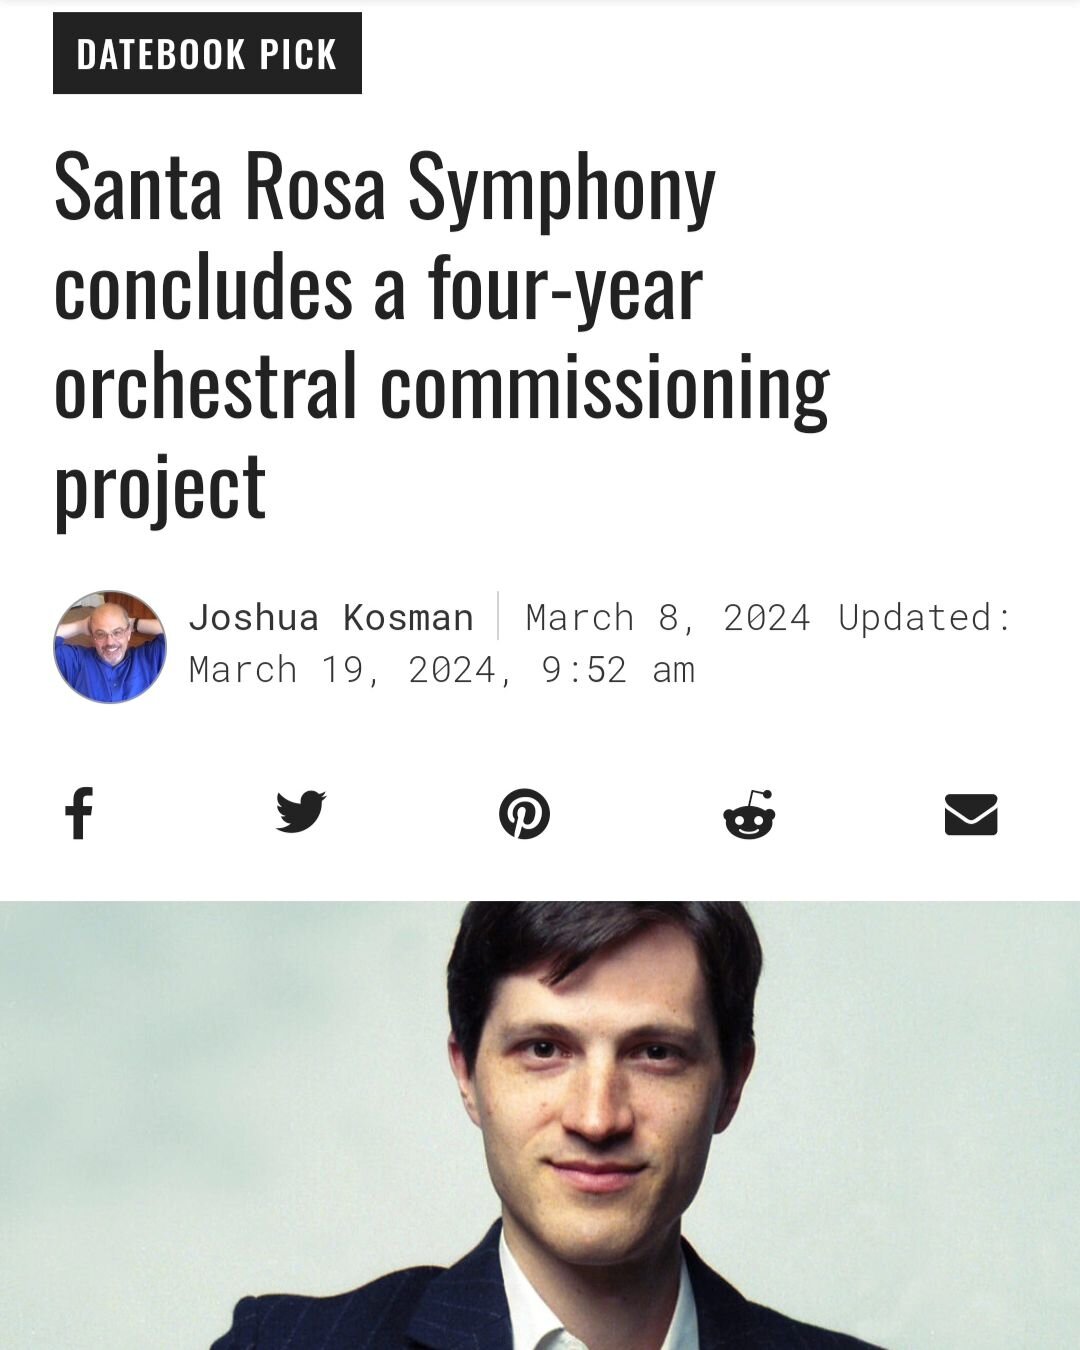 Many thanks to @sfchronicle @sfchronicle_datebook for bringing visibility to the First Symphony Project over the past 4 years. Tonight starts rehearsals for the final major commission by Michael Djupstrom at the @srsymphony - more here about this wee